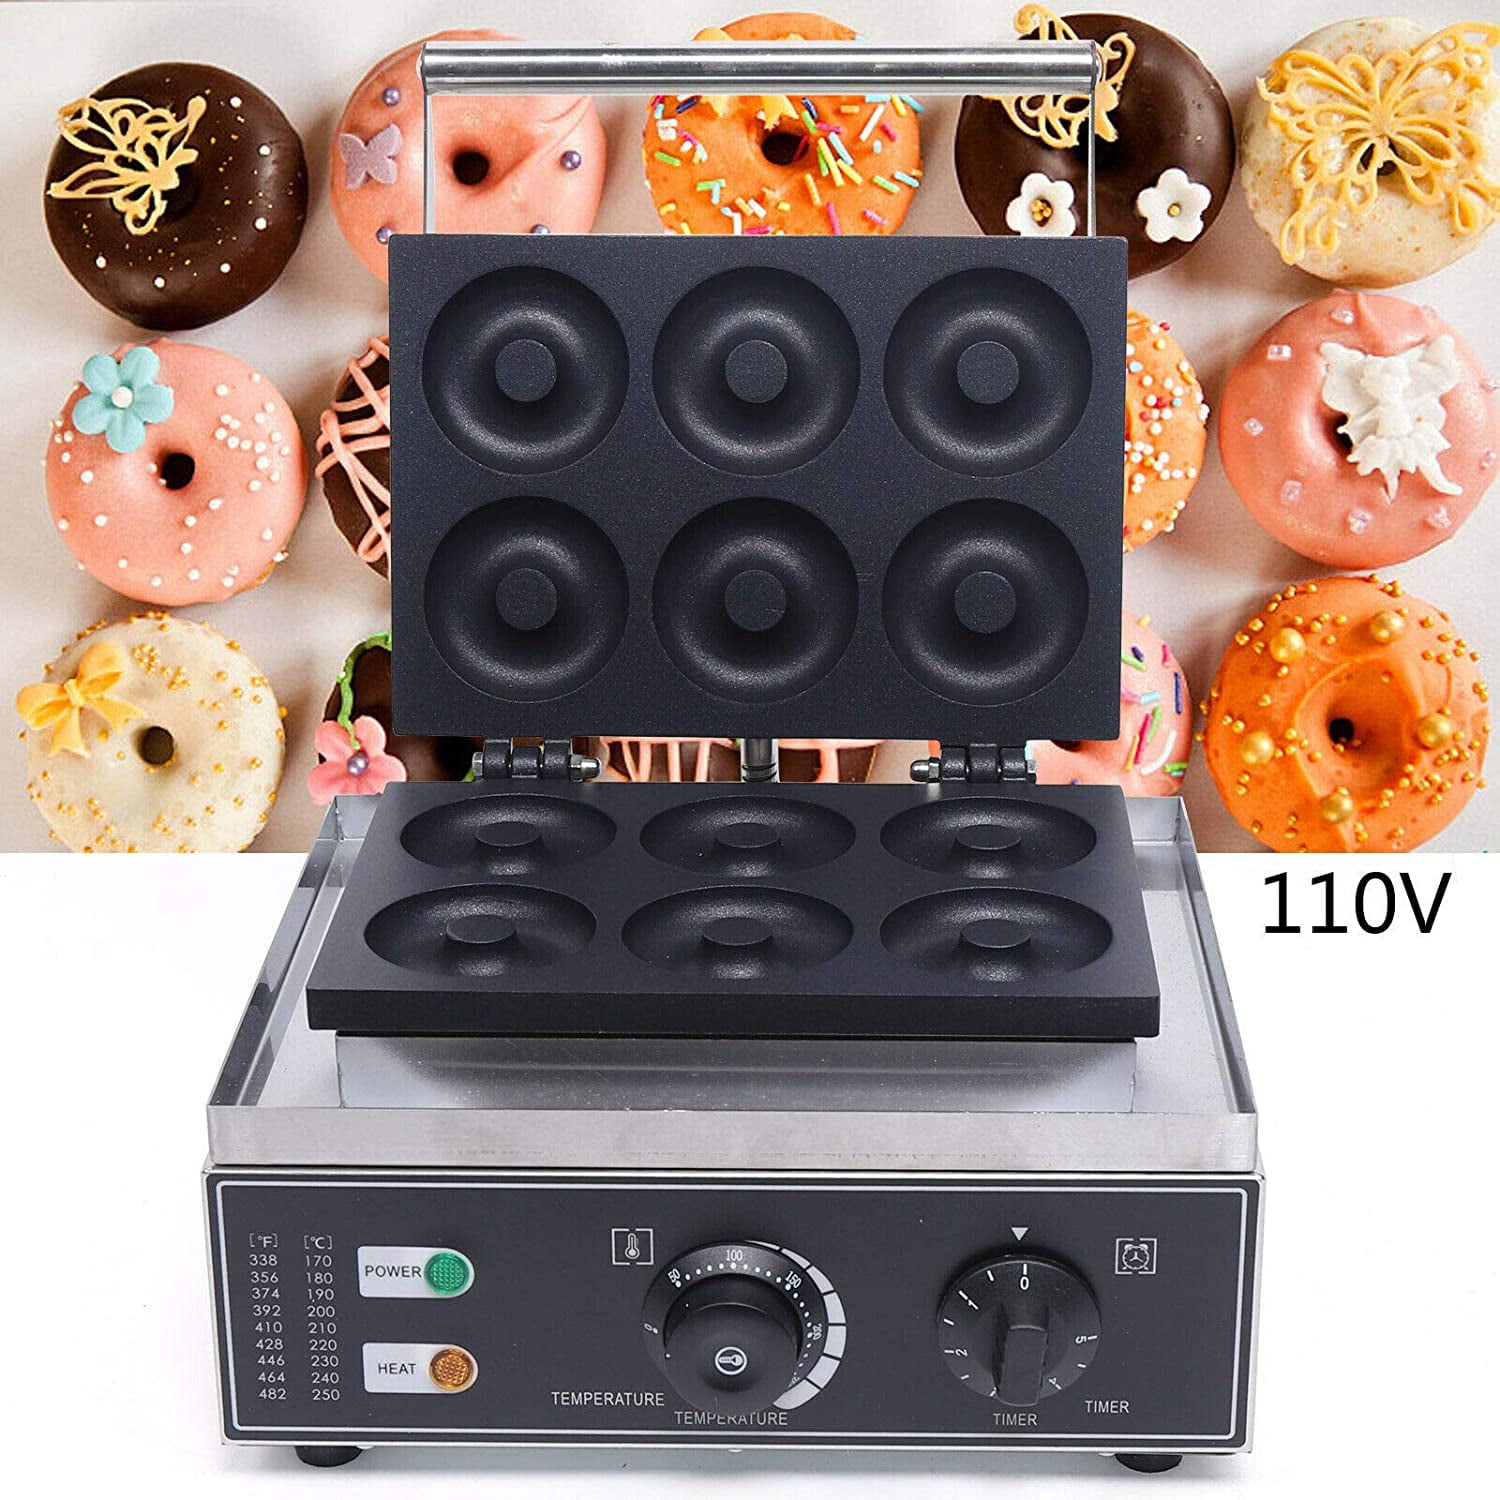 110V Waffle Donut Maker Machine 12-Hole Double-sided Heating Electric Donut Bakery Maker with Non-Stick Coating Stainless Steel Donut Machine for Bakery Dessert Shop Mall Coffee Shop and Restaurant 